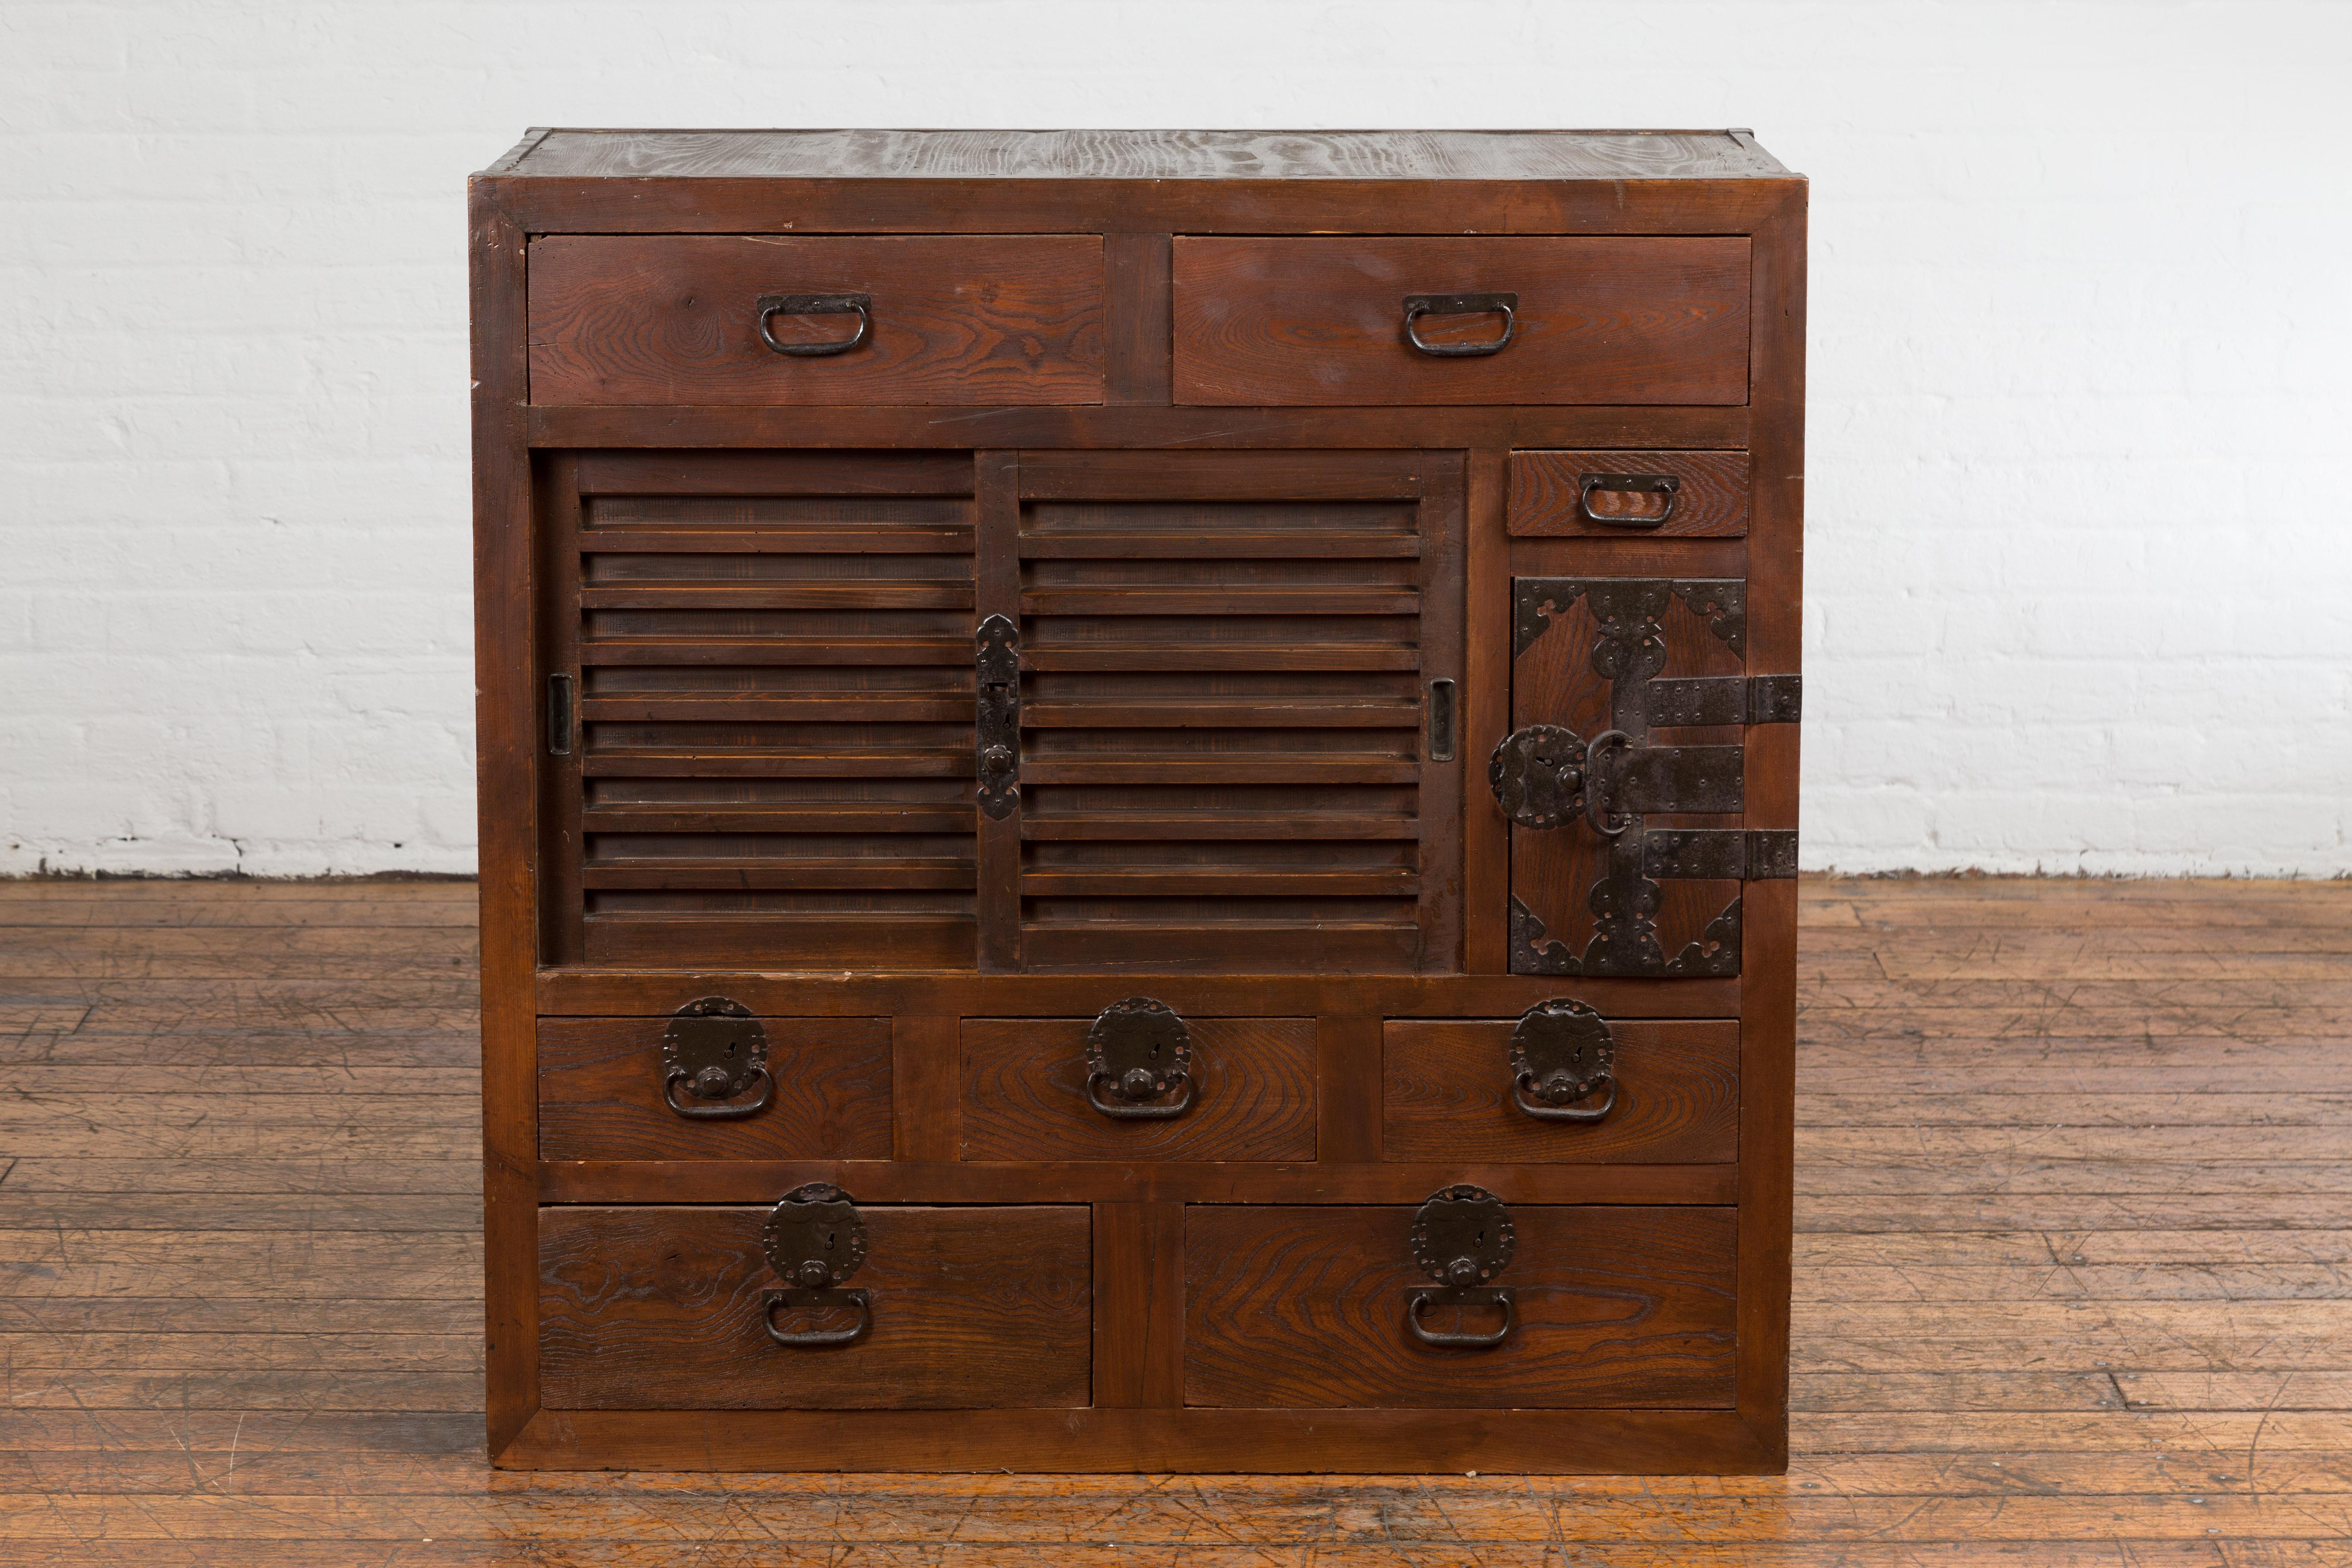 A Japanese Meiji period choba dansu merchant's chest from the 19th century with sliding doors, eight drawers, side door opening to two additional drawers and iron hardware. This 19th-century Japanese choba dansu merchant's chest, a quintessential